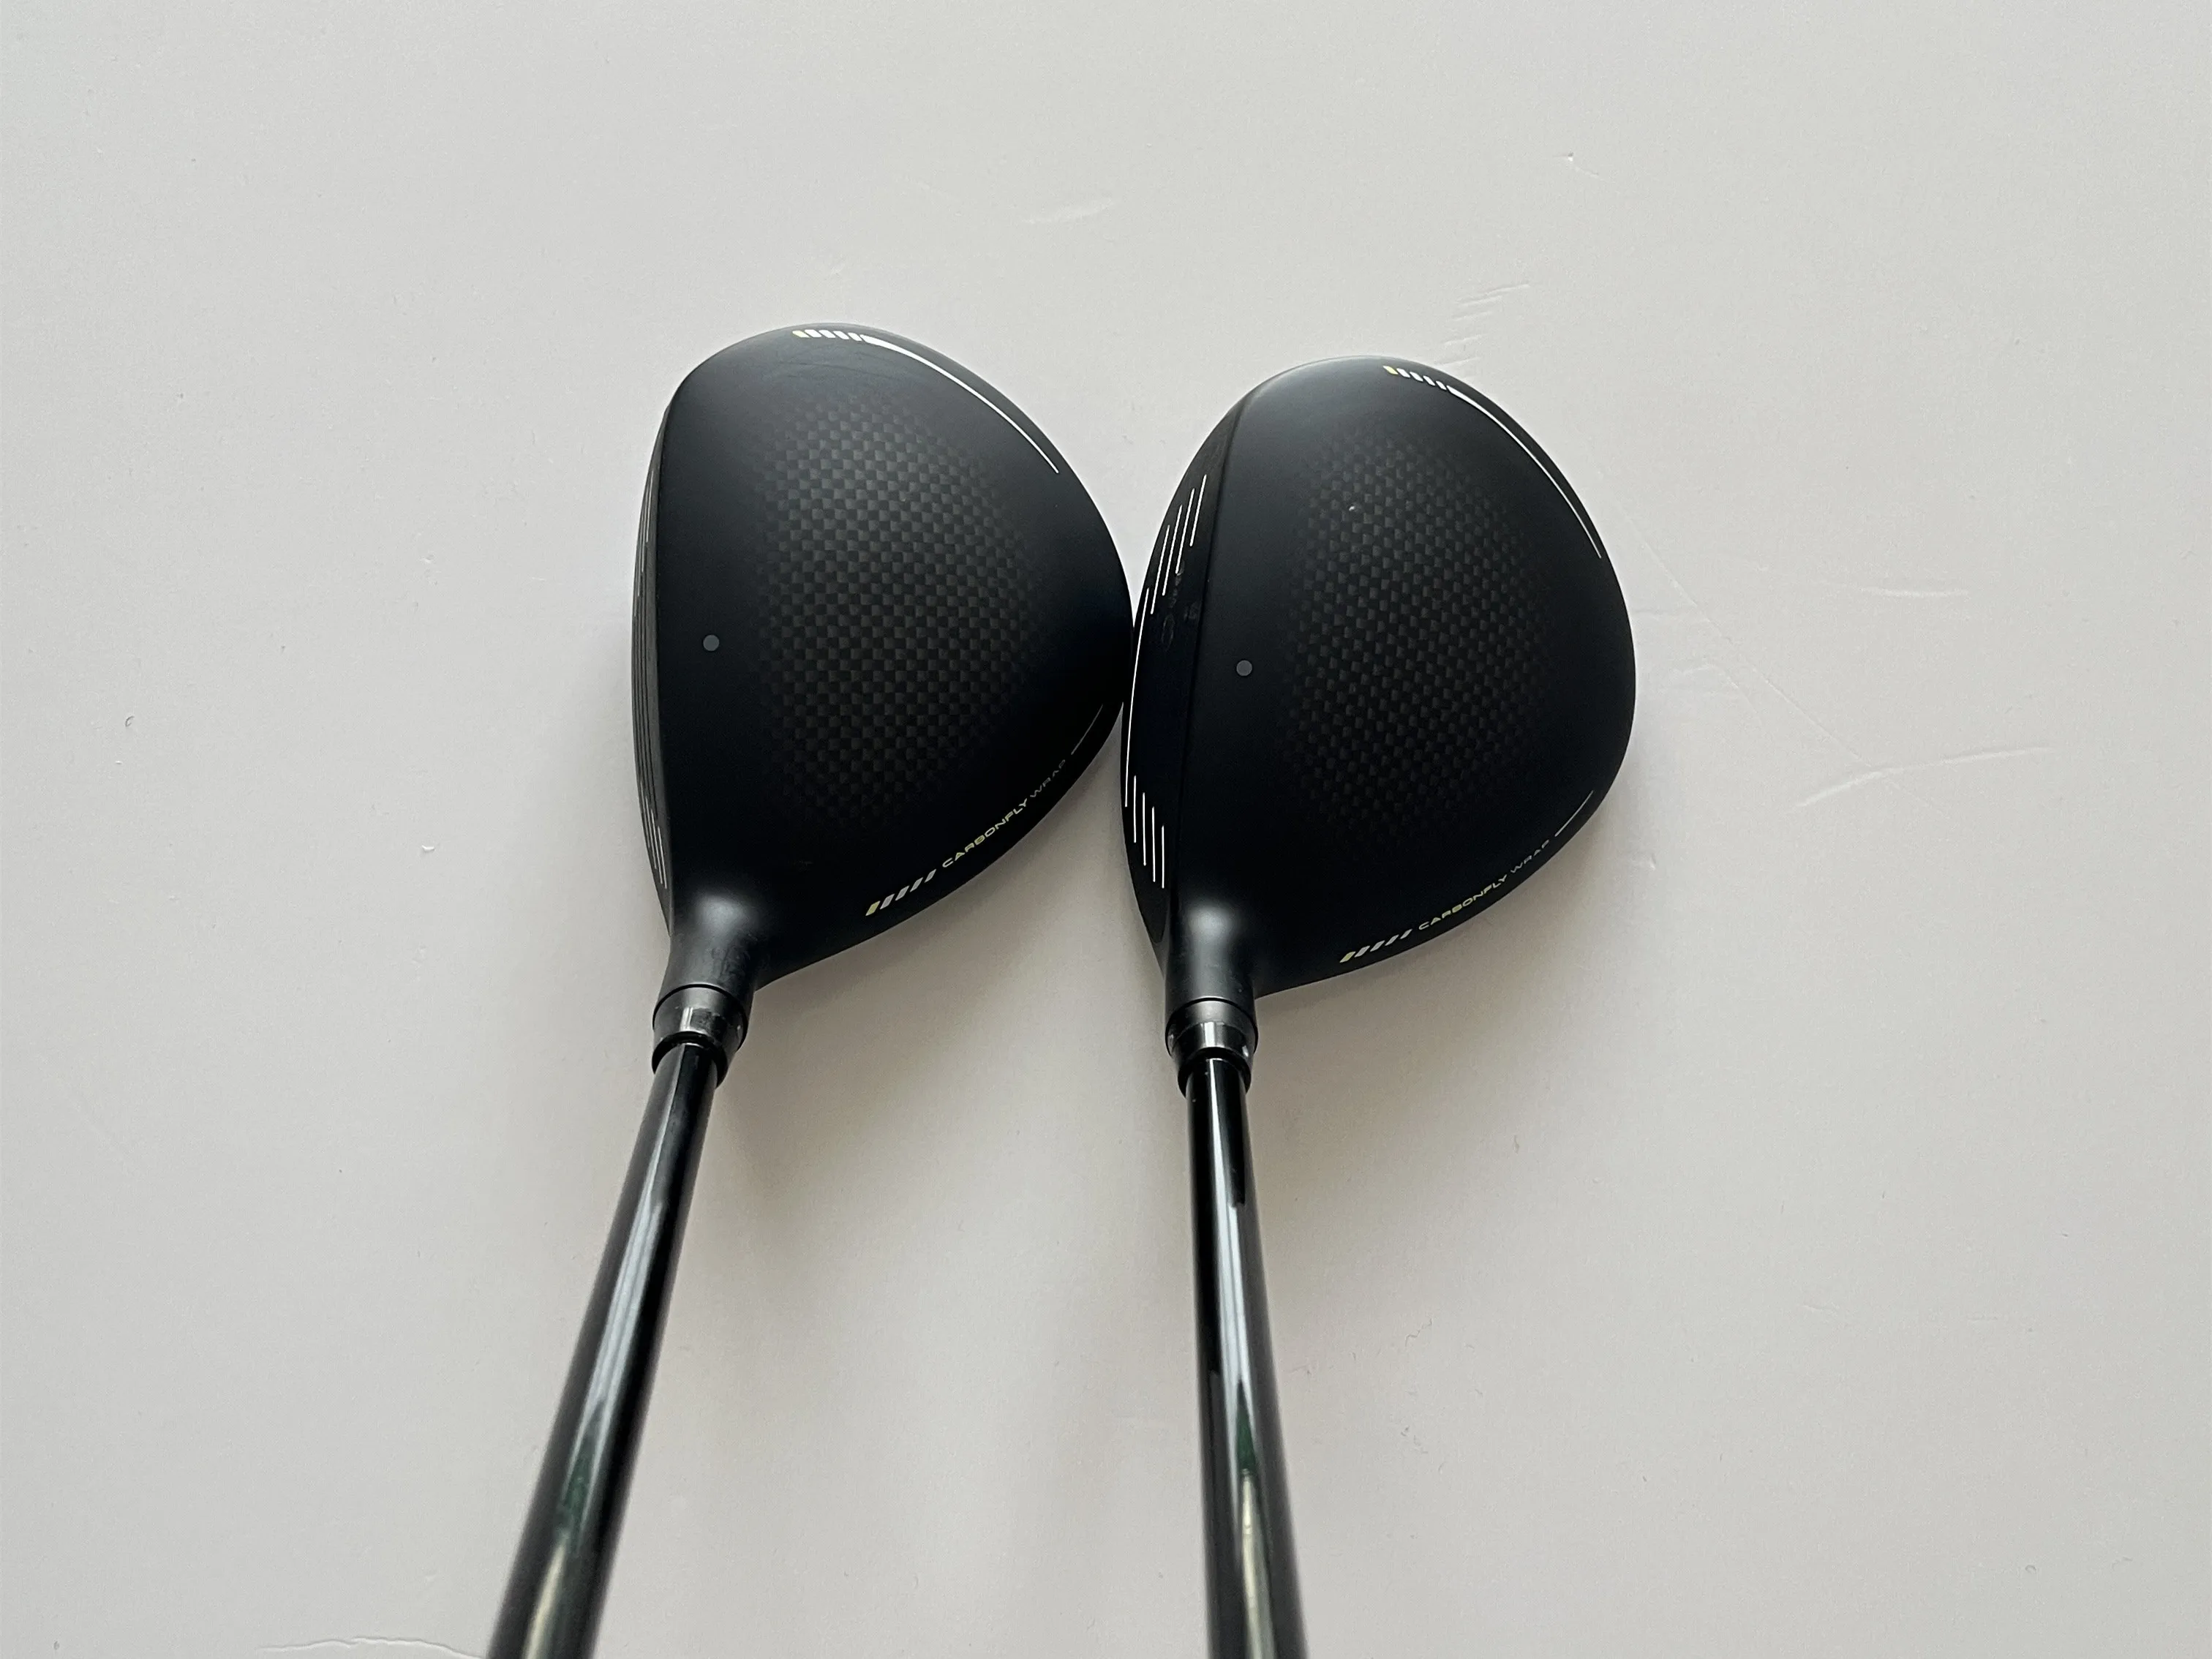 

Brand New 430 Max Fairway Woods 430 Max Golf Woods Golf Clubs #3/#5 R/S/SR/X Flex Graphite Shaft With Head Cover